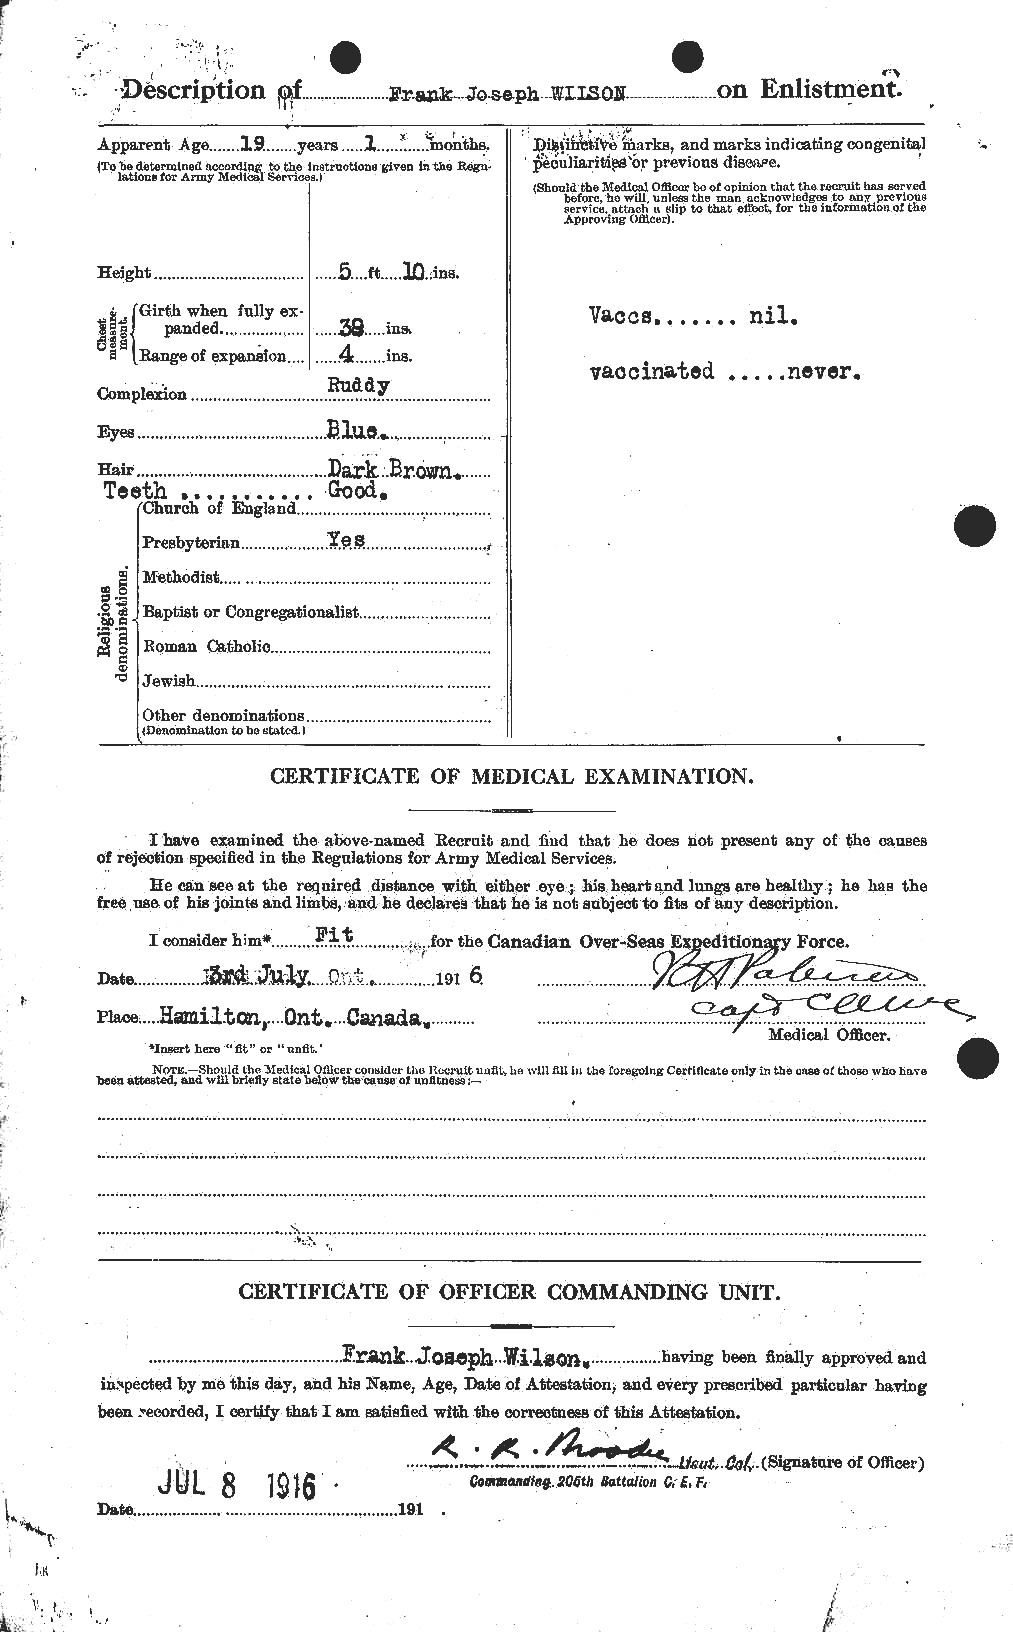 Personnel Records of the First World War - CEF 680678b